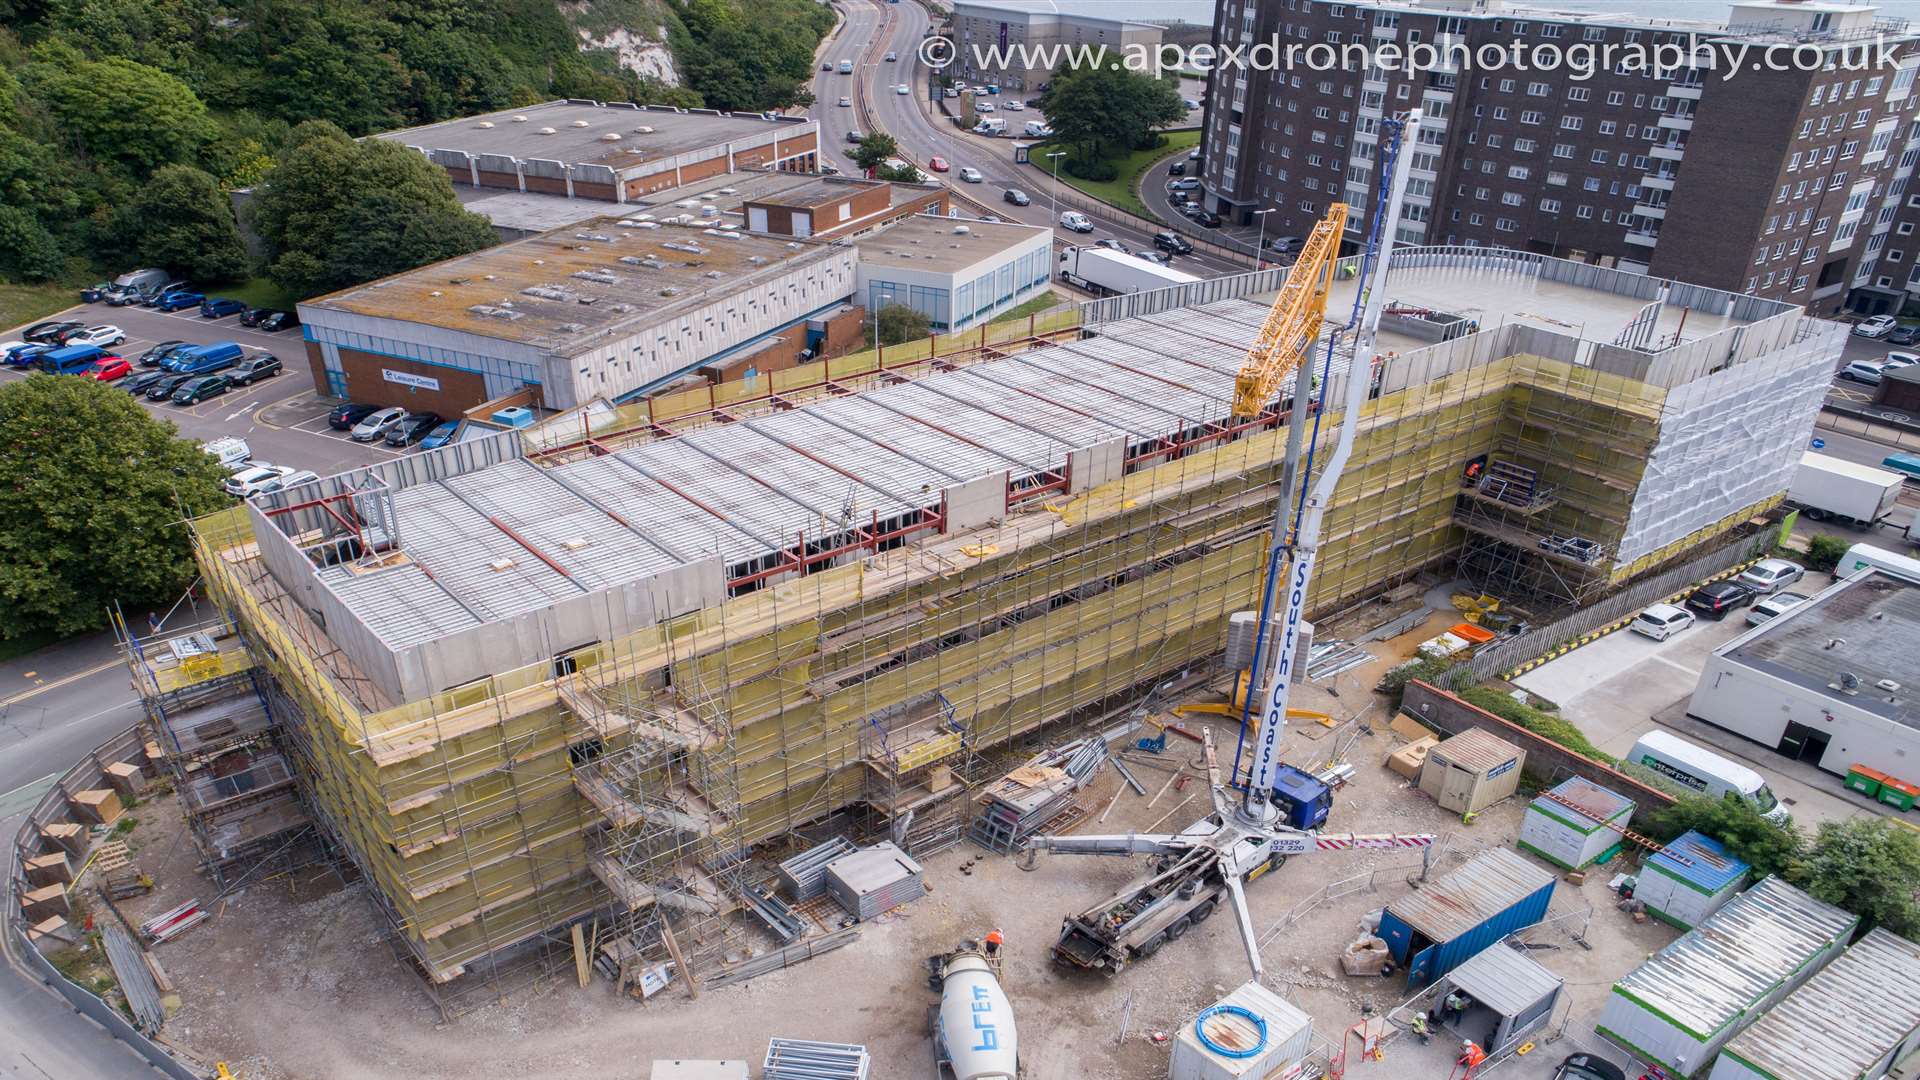 The new Travelodge taking shape in August. Picture courtesy of Apex Drone Photography